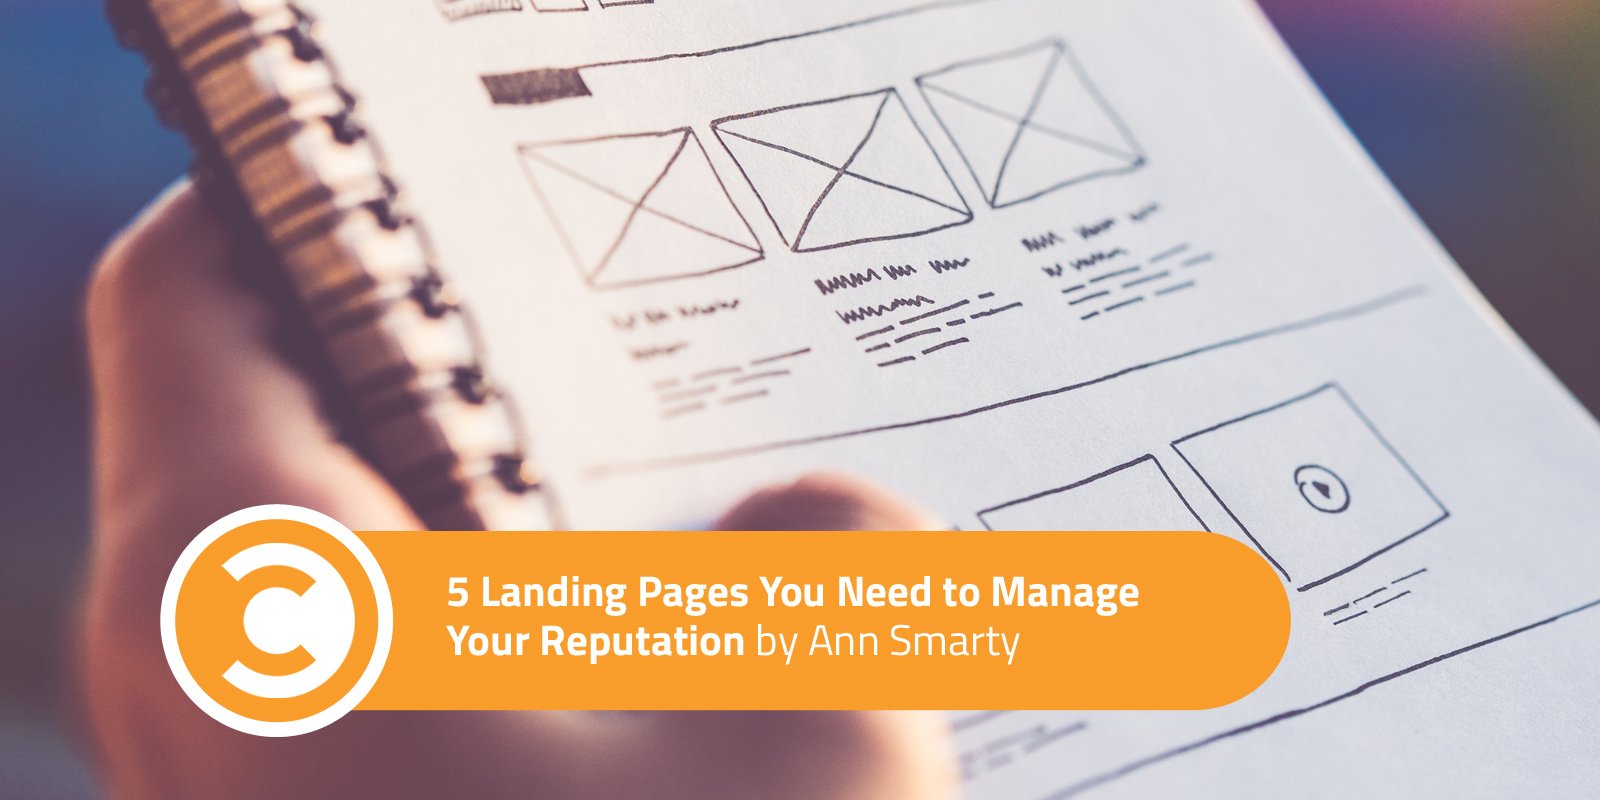 5 Landing Pages You Need to Manage Your Reputation